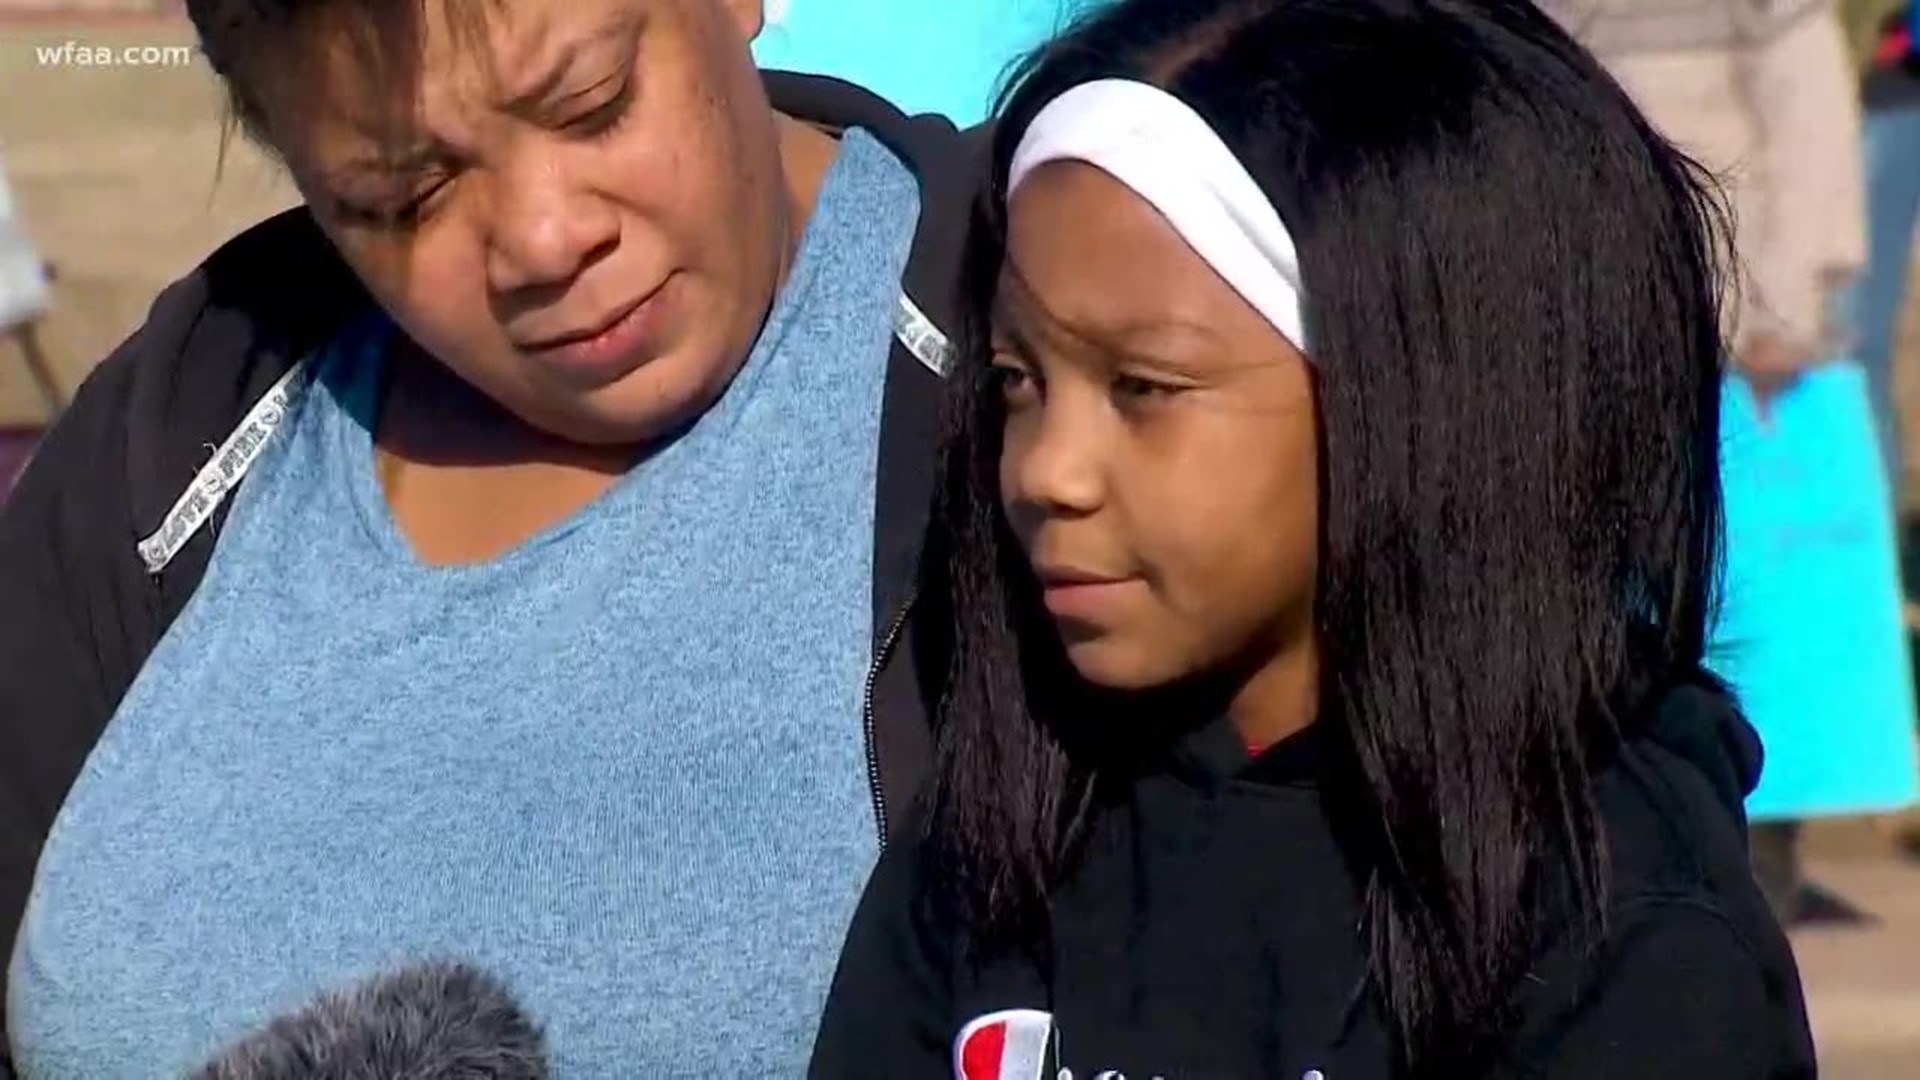 'I just want to leave school forever': TX girl battling cancer says student snatched wig off her head and called her names - Courtesy WFAA